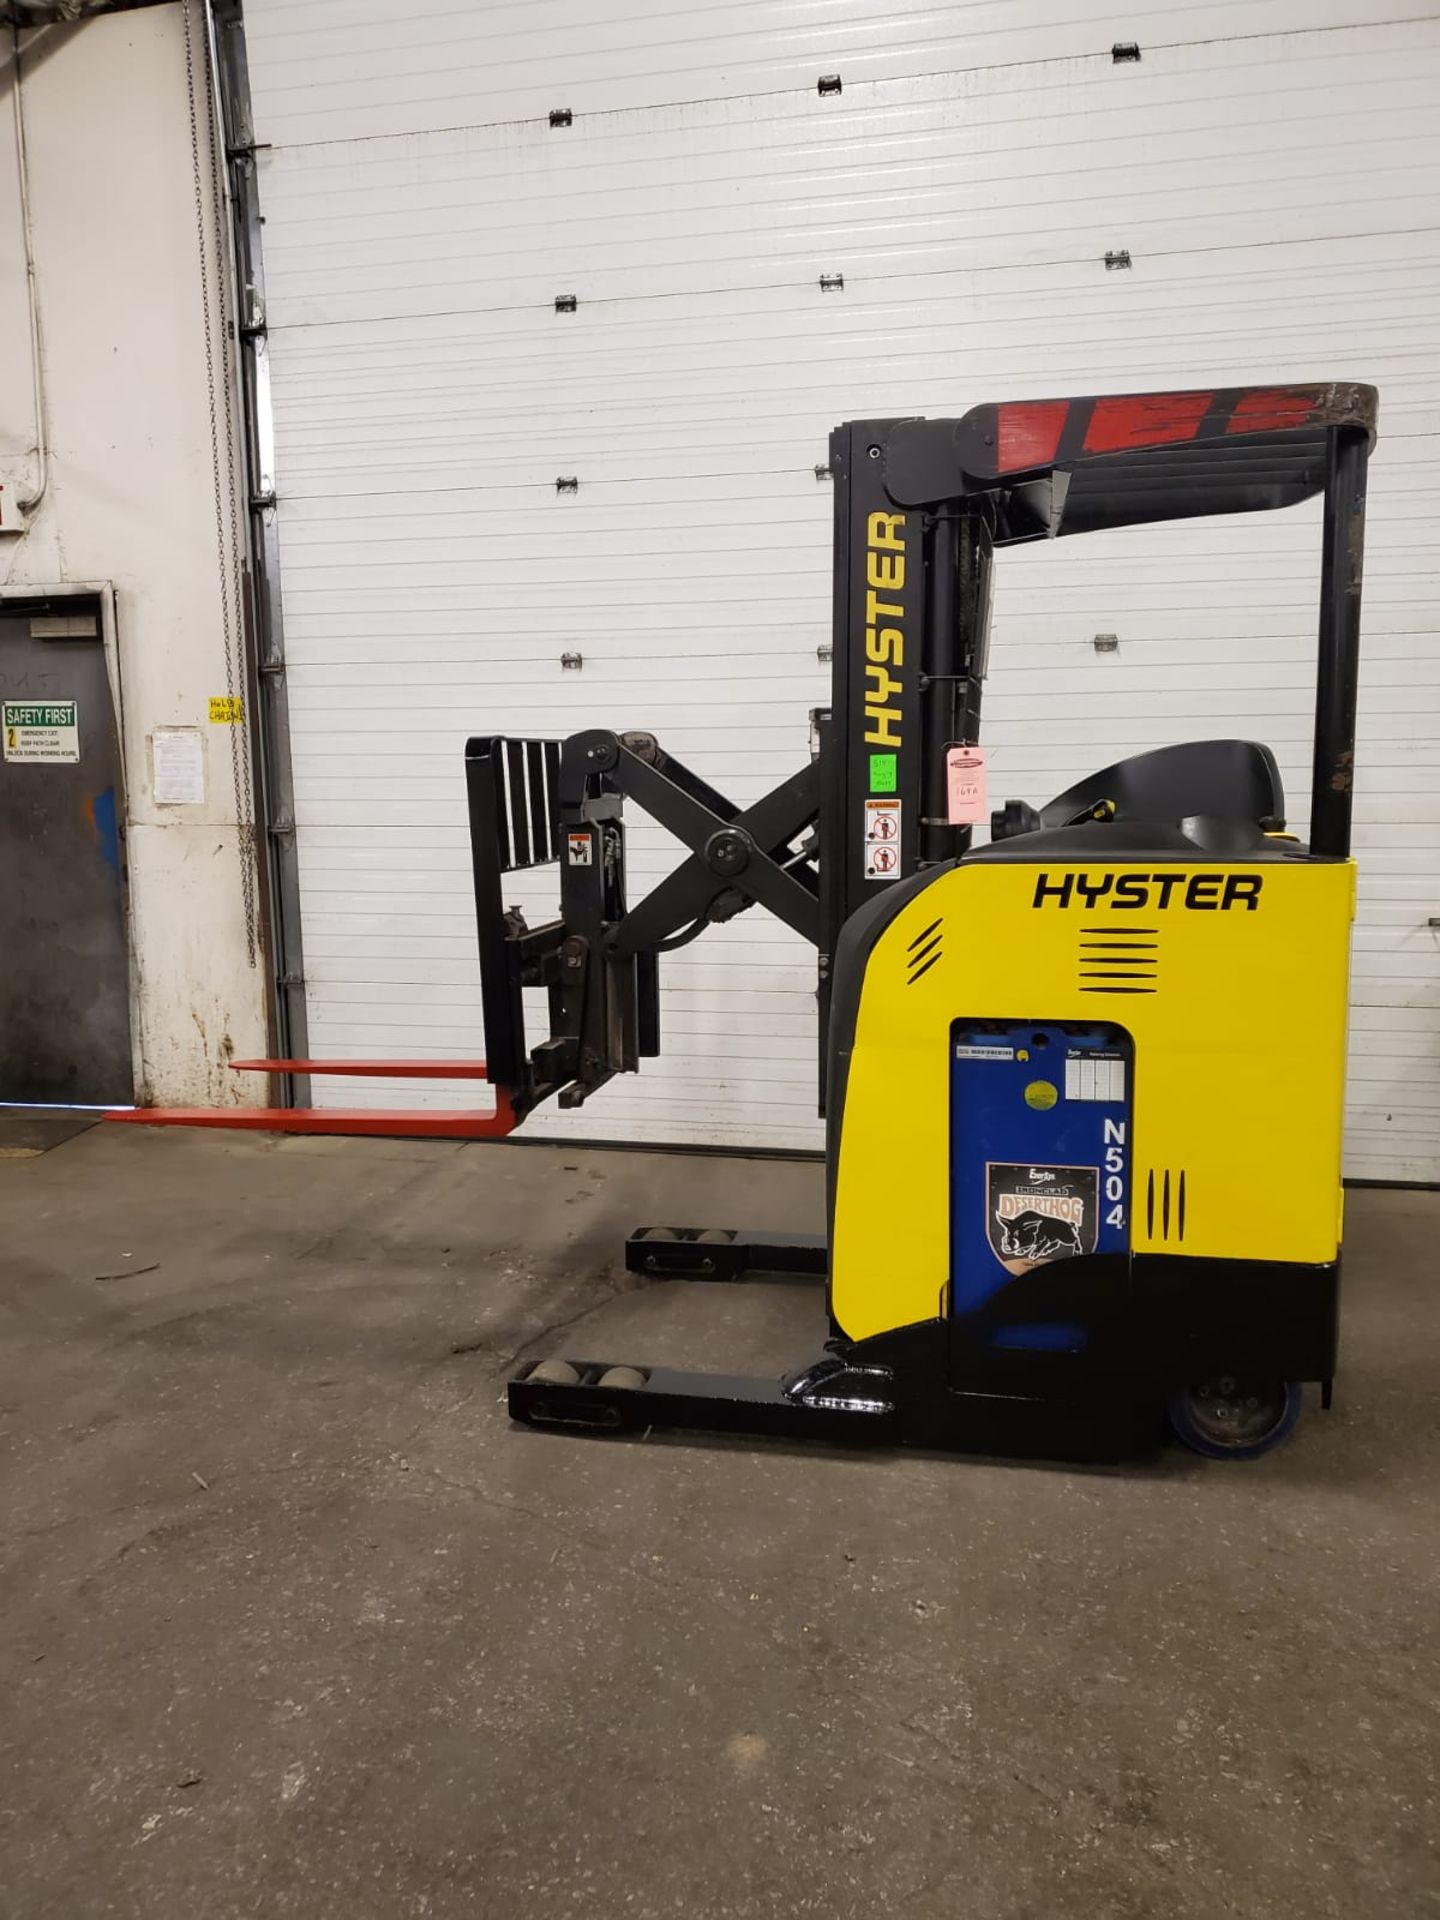 2014 Hyster Reach Truck Pallet Lifter 3800lbs capacity unit ELECTRIC with sideshift